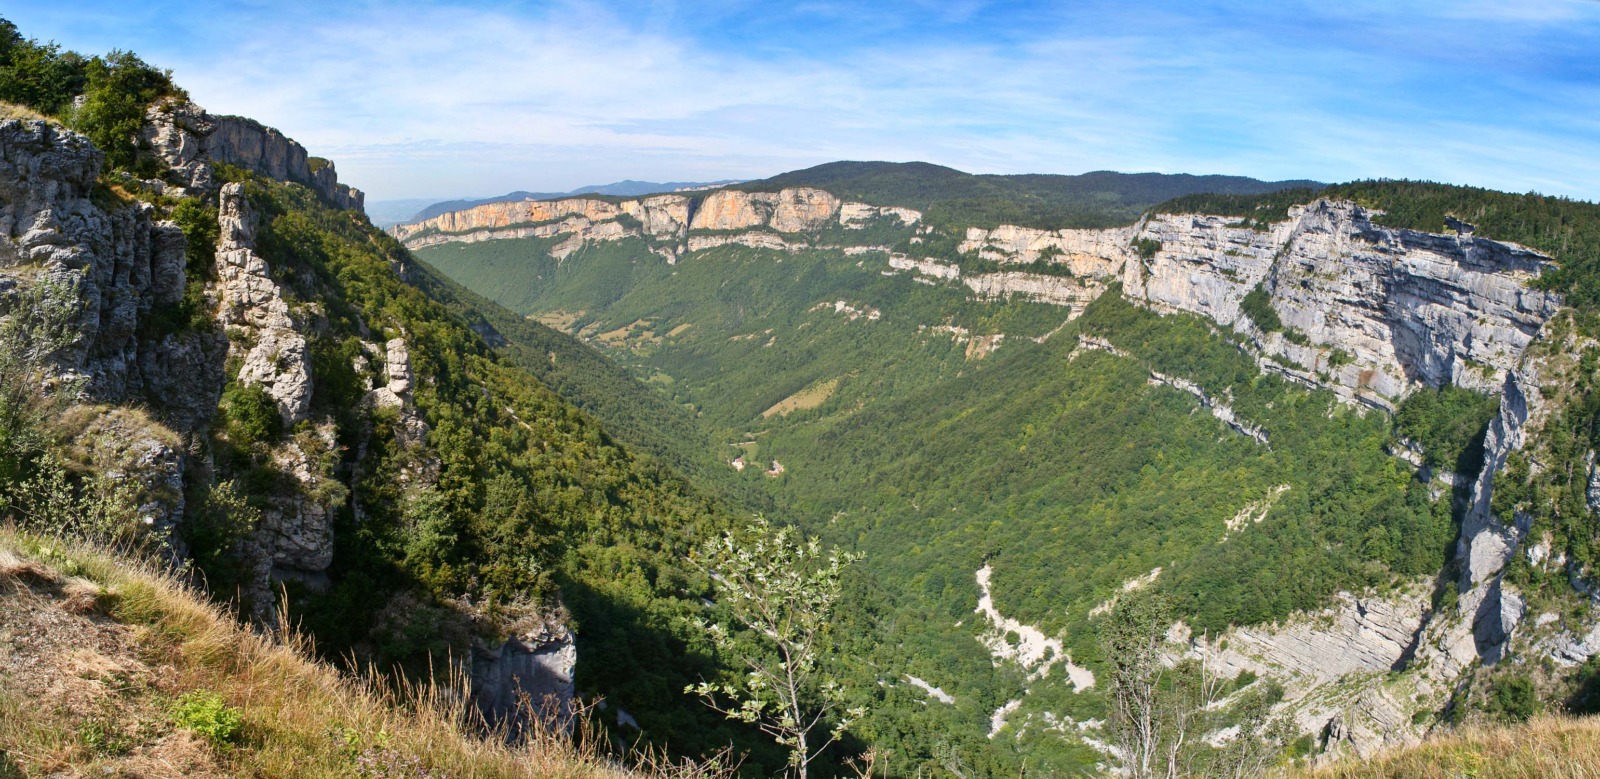 Forest in France - Vercors Forest © Berrucomons - licence [CC BY-SA 3.0] from Wikimedia Commons